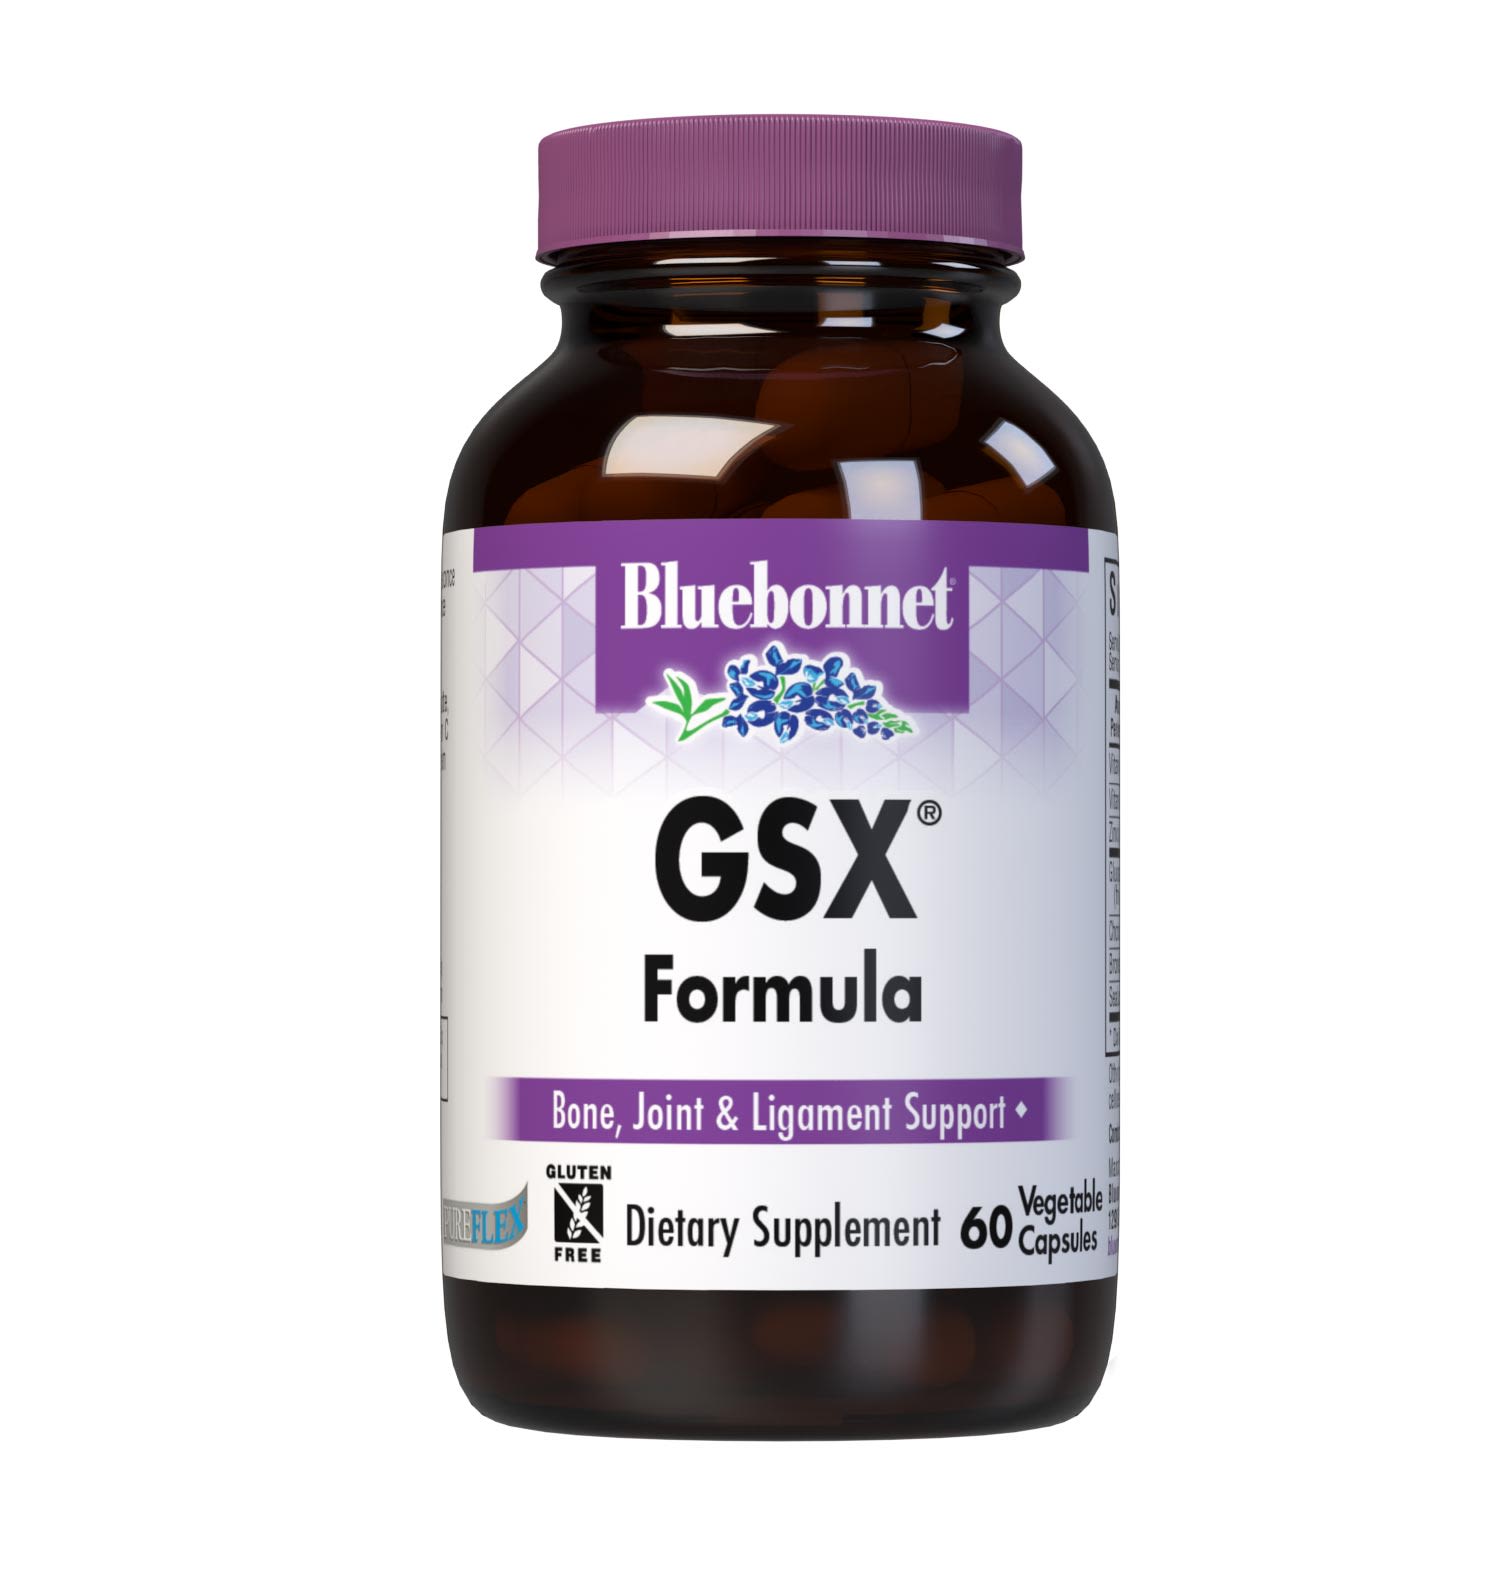 Bluebonnet’s GSX® Formula Vegetable Capsules are formulated with a combination of glucosamine sulfate, chondritin sulfate, and sea cucumber along with vitamin C and B6, zinc picolinate, and pineapple sourced bromelain to help support bone, joint and ligament health. #size_60 count